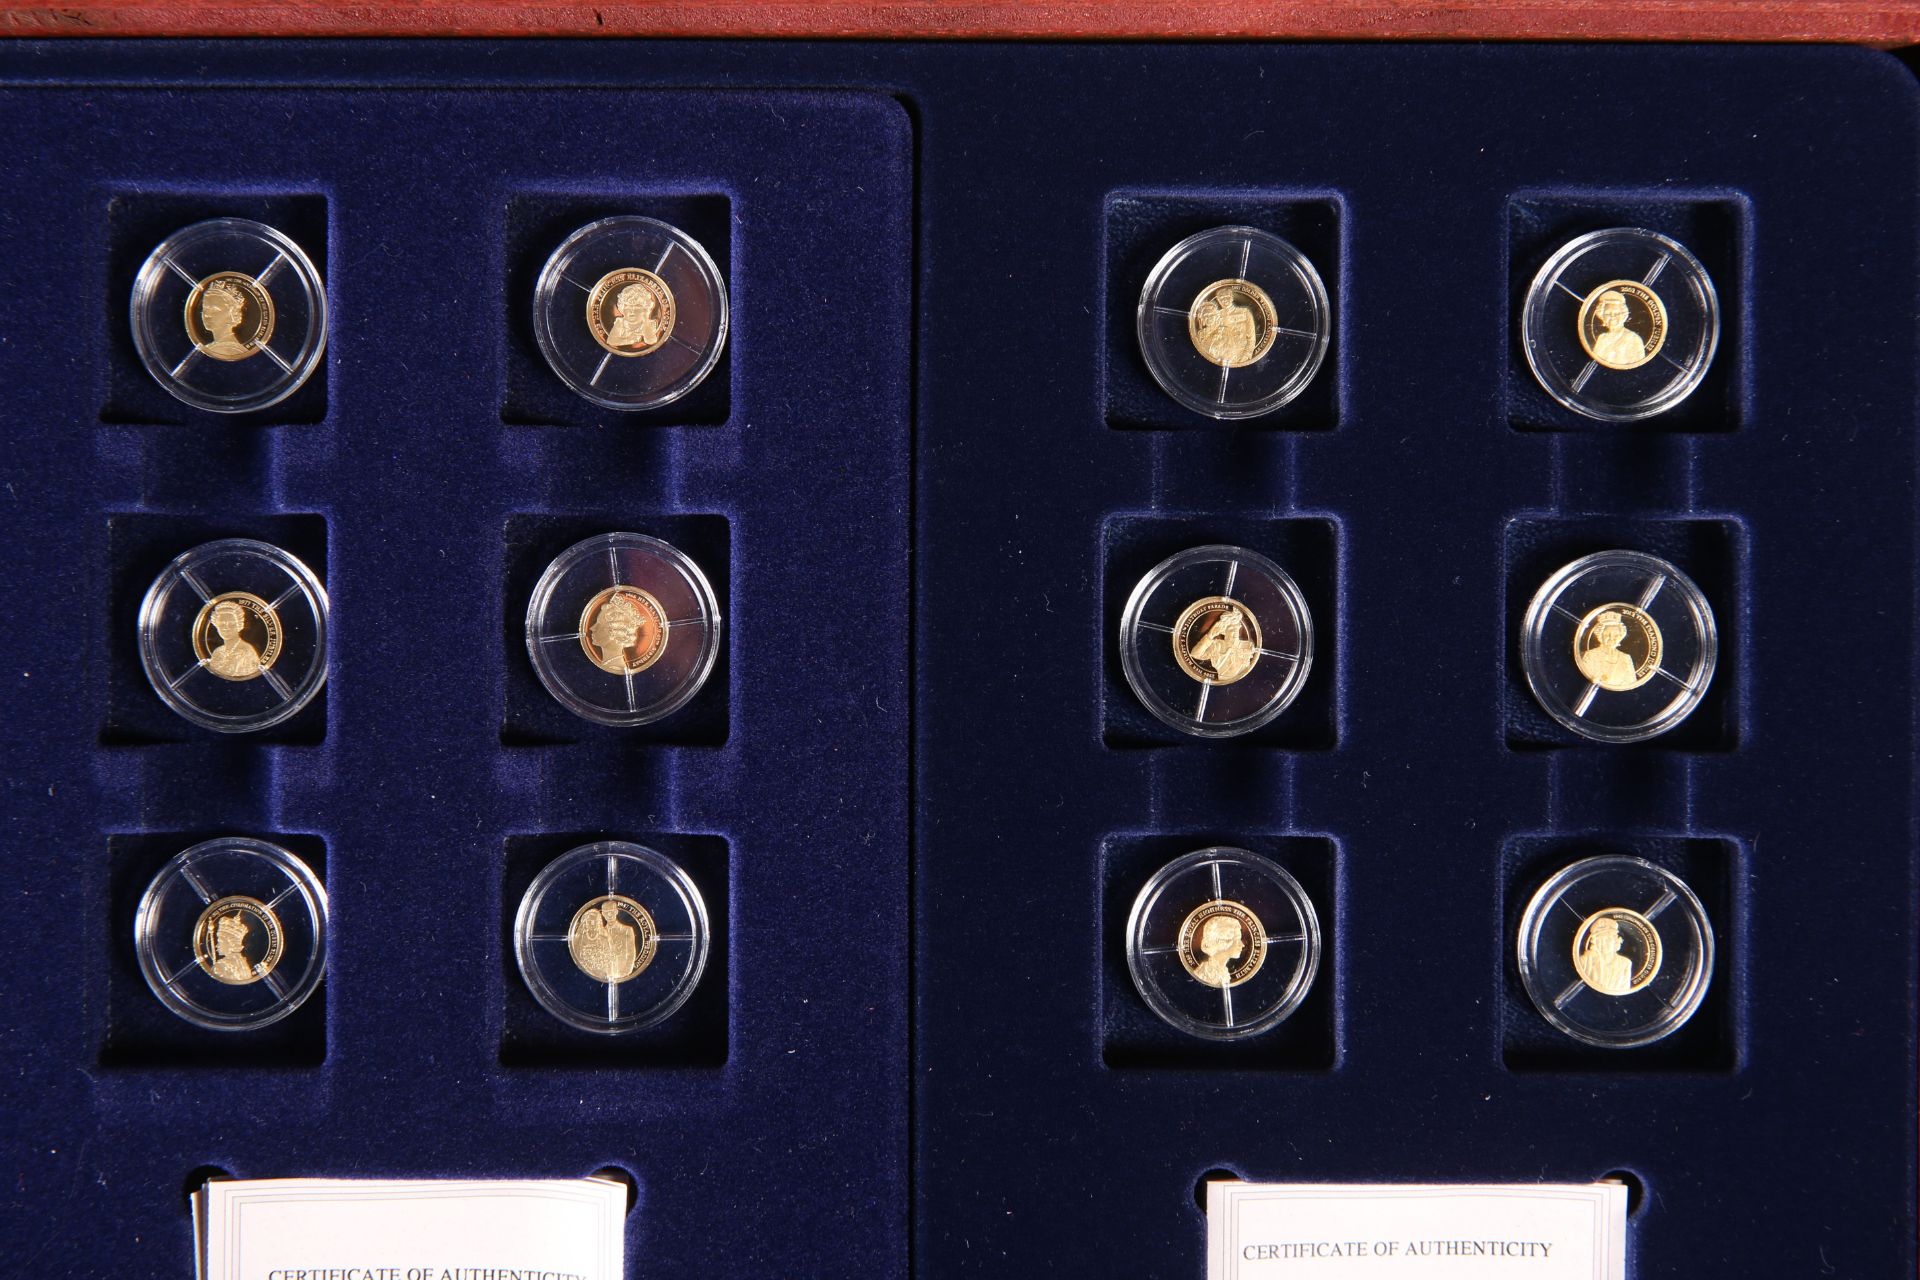 A TWELVE COIN GOLD PROOF SET, "THE QUEEN'S DIAMOND JUBILEE", the complete collection under